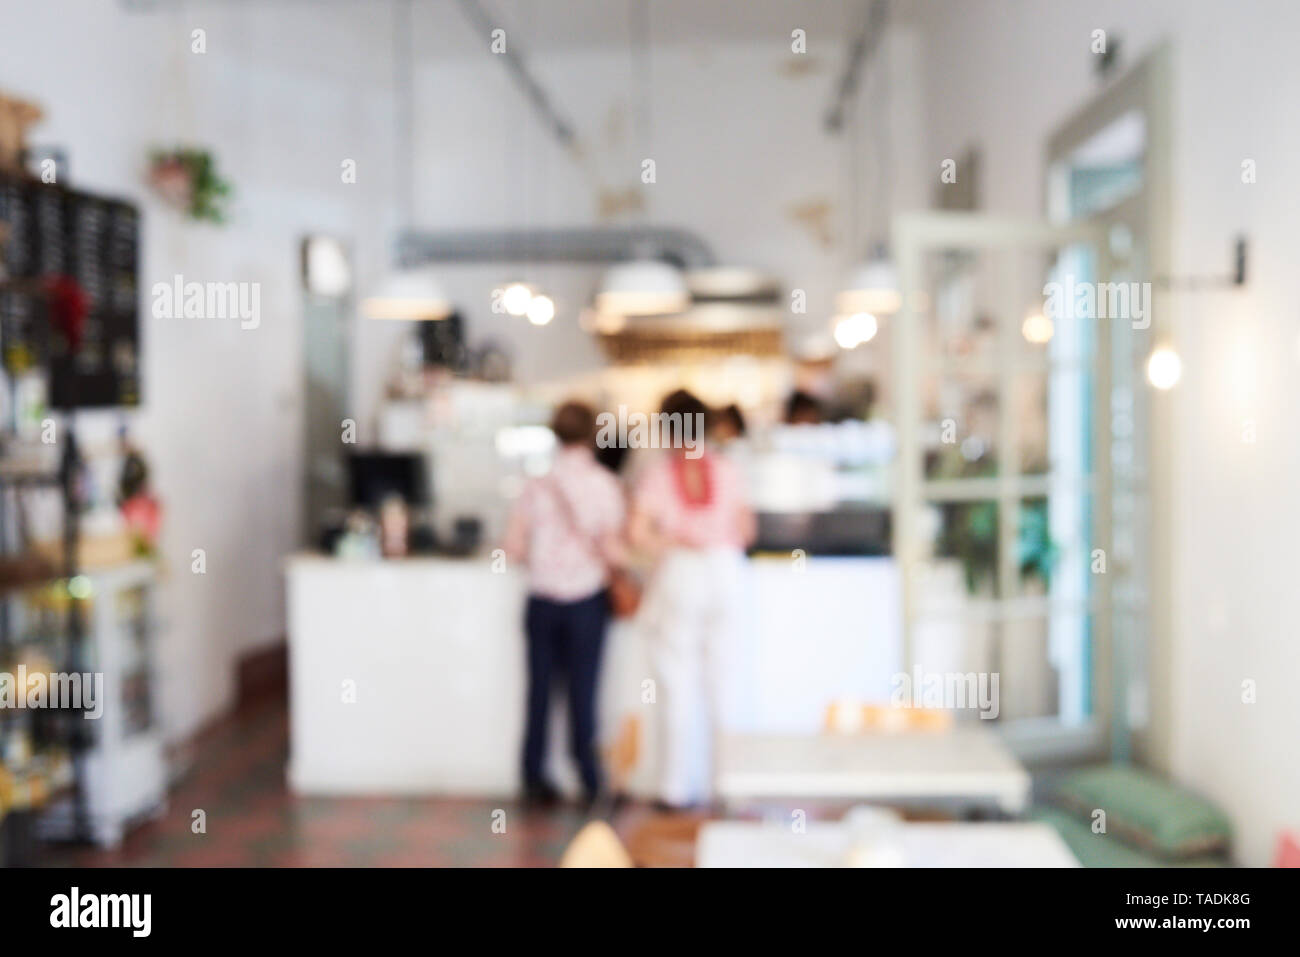 Blurred view of people in a cafe Stock Photo